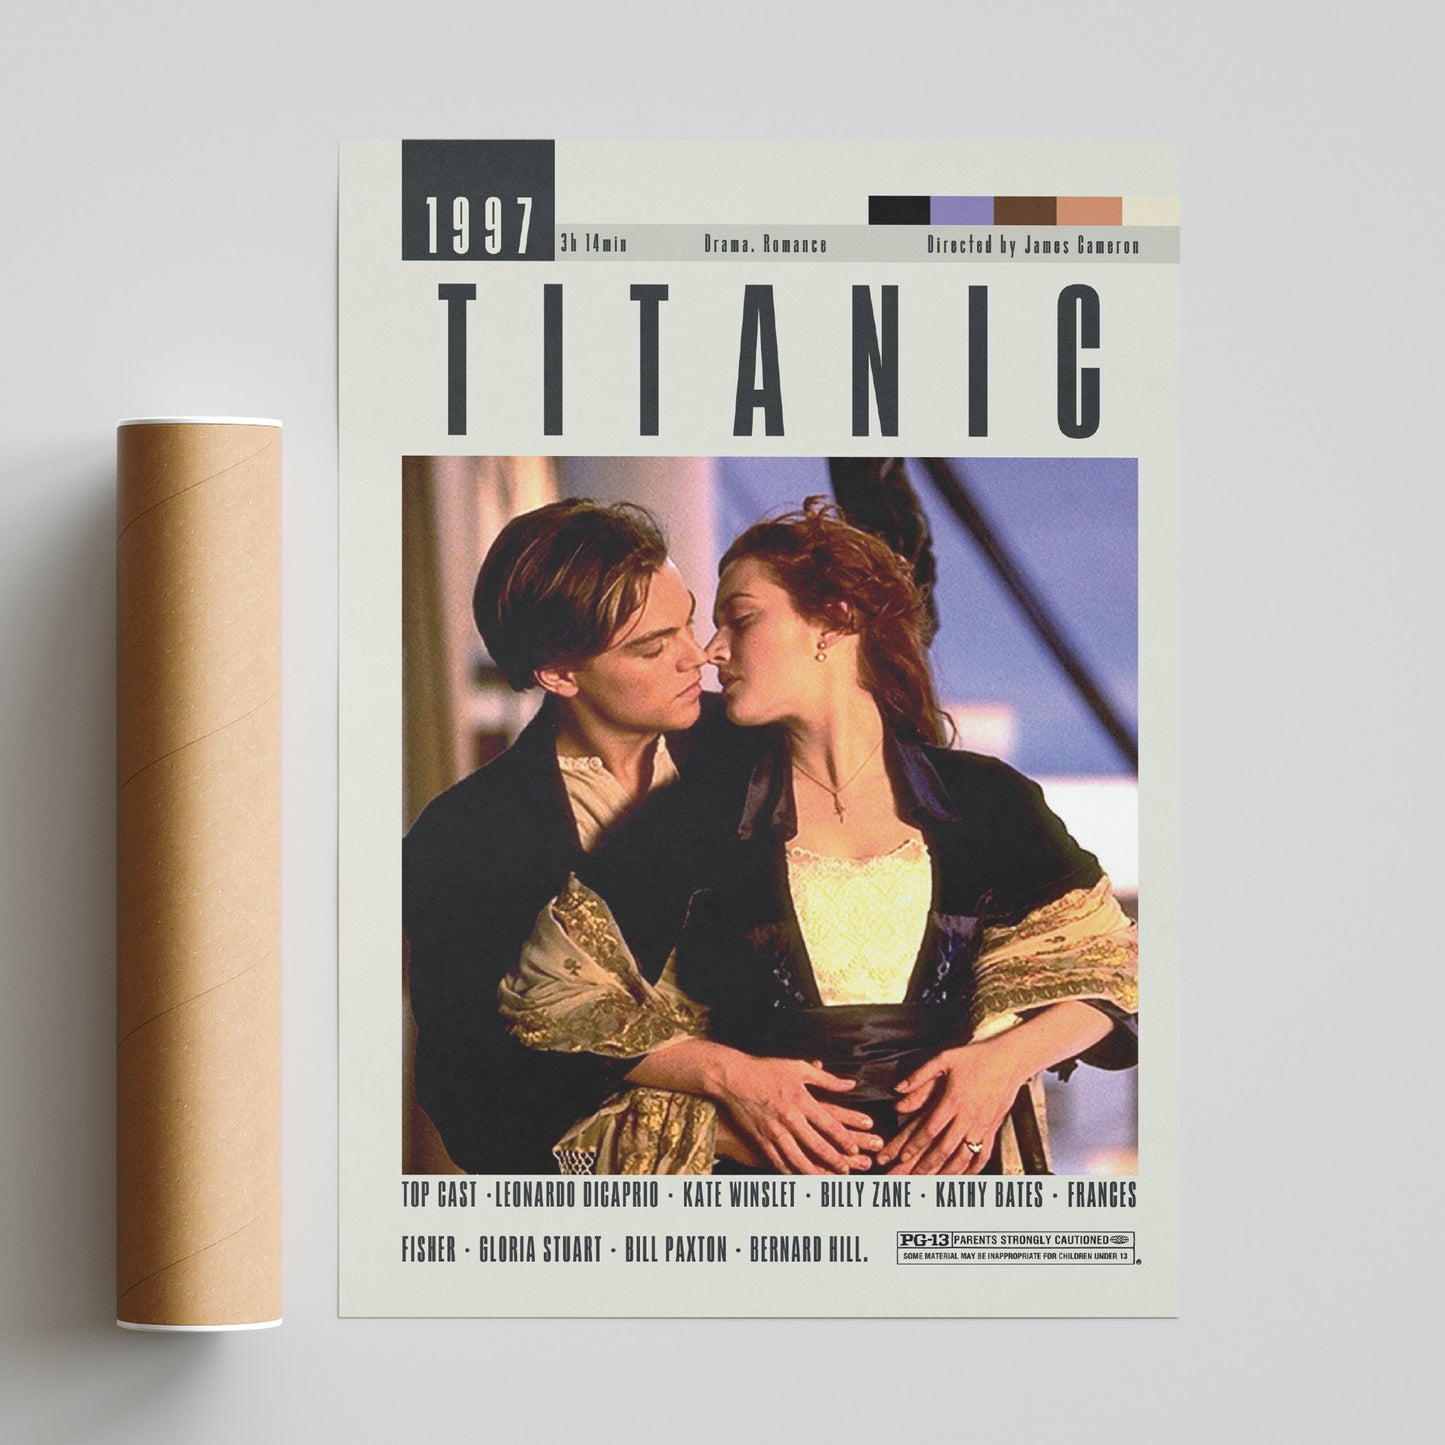 "Set sail with the best movies of all time in your midcentury modern home! This retro movie poster for James Cameron's Titanic is the perfect addition to your movie wall decor. With a minimalist design and quirky midcentury style, this print is a must-have for any Hollywood movie lover. Ahoy there!"